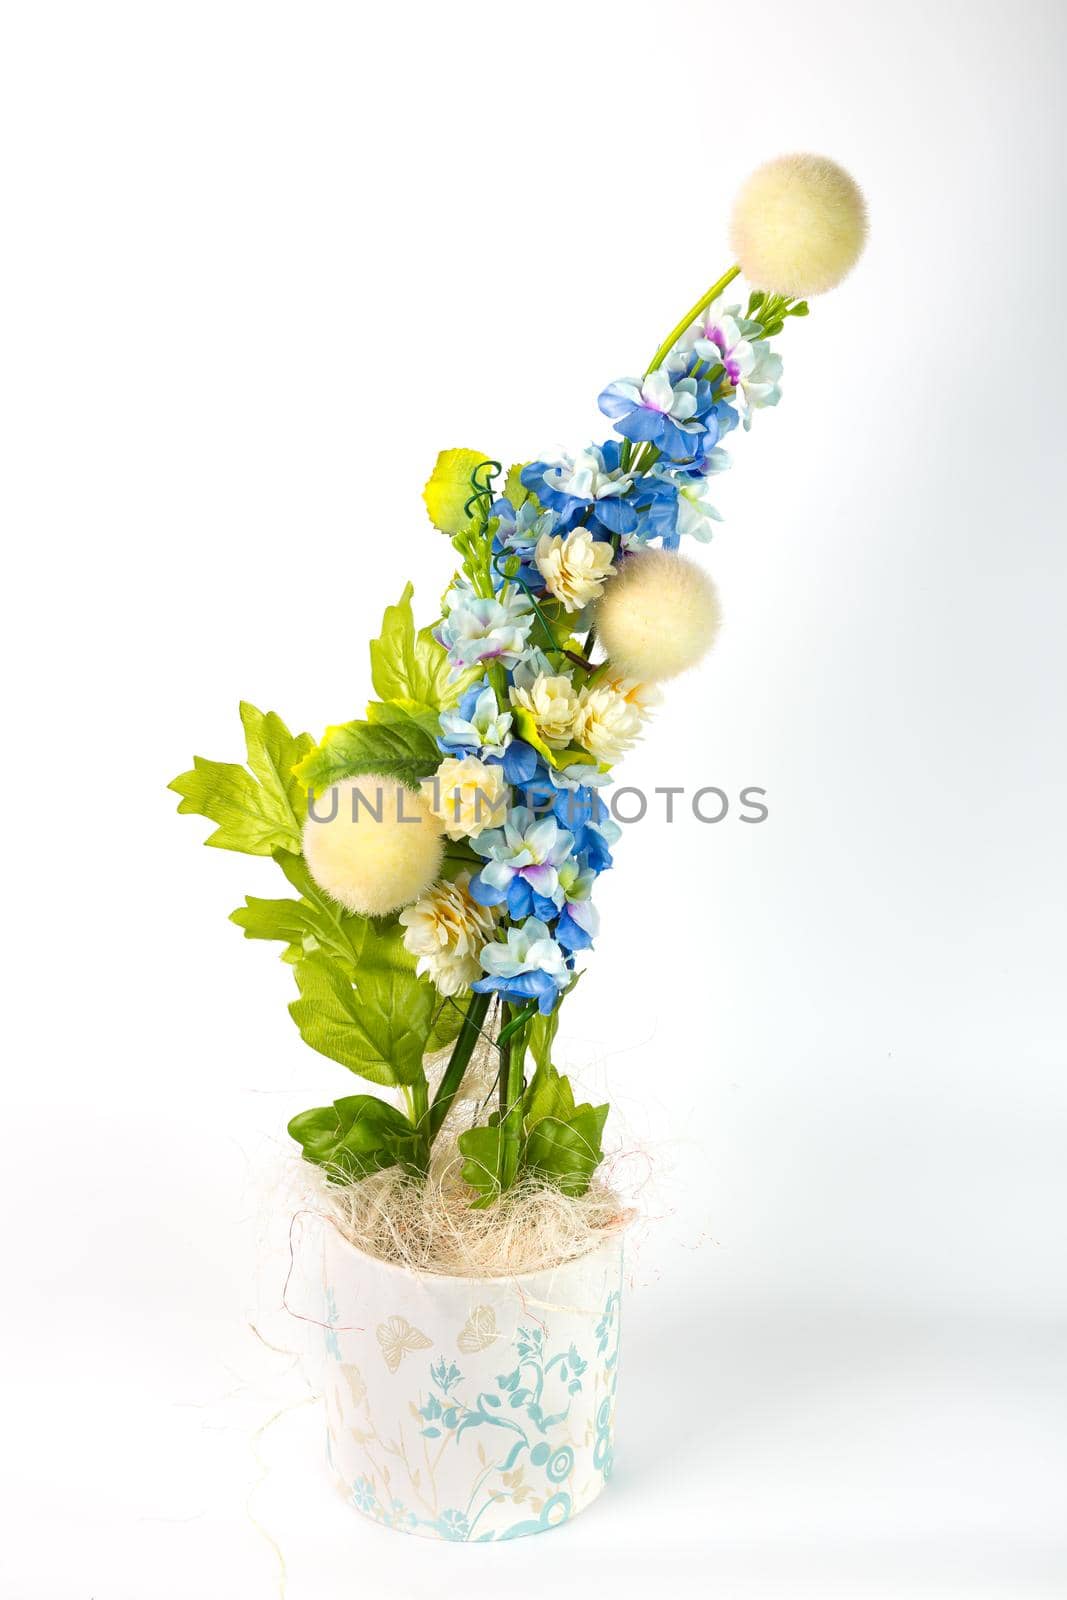 Composition with artificial flowers in a pot on white background. Ekibana from white and blue artificial flowers and green leaves.